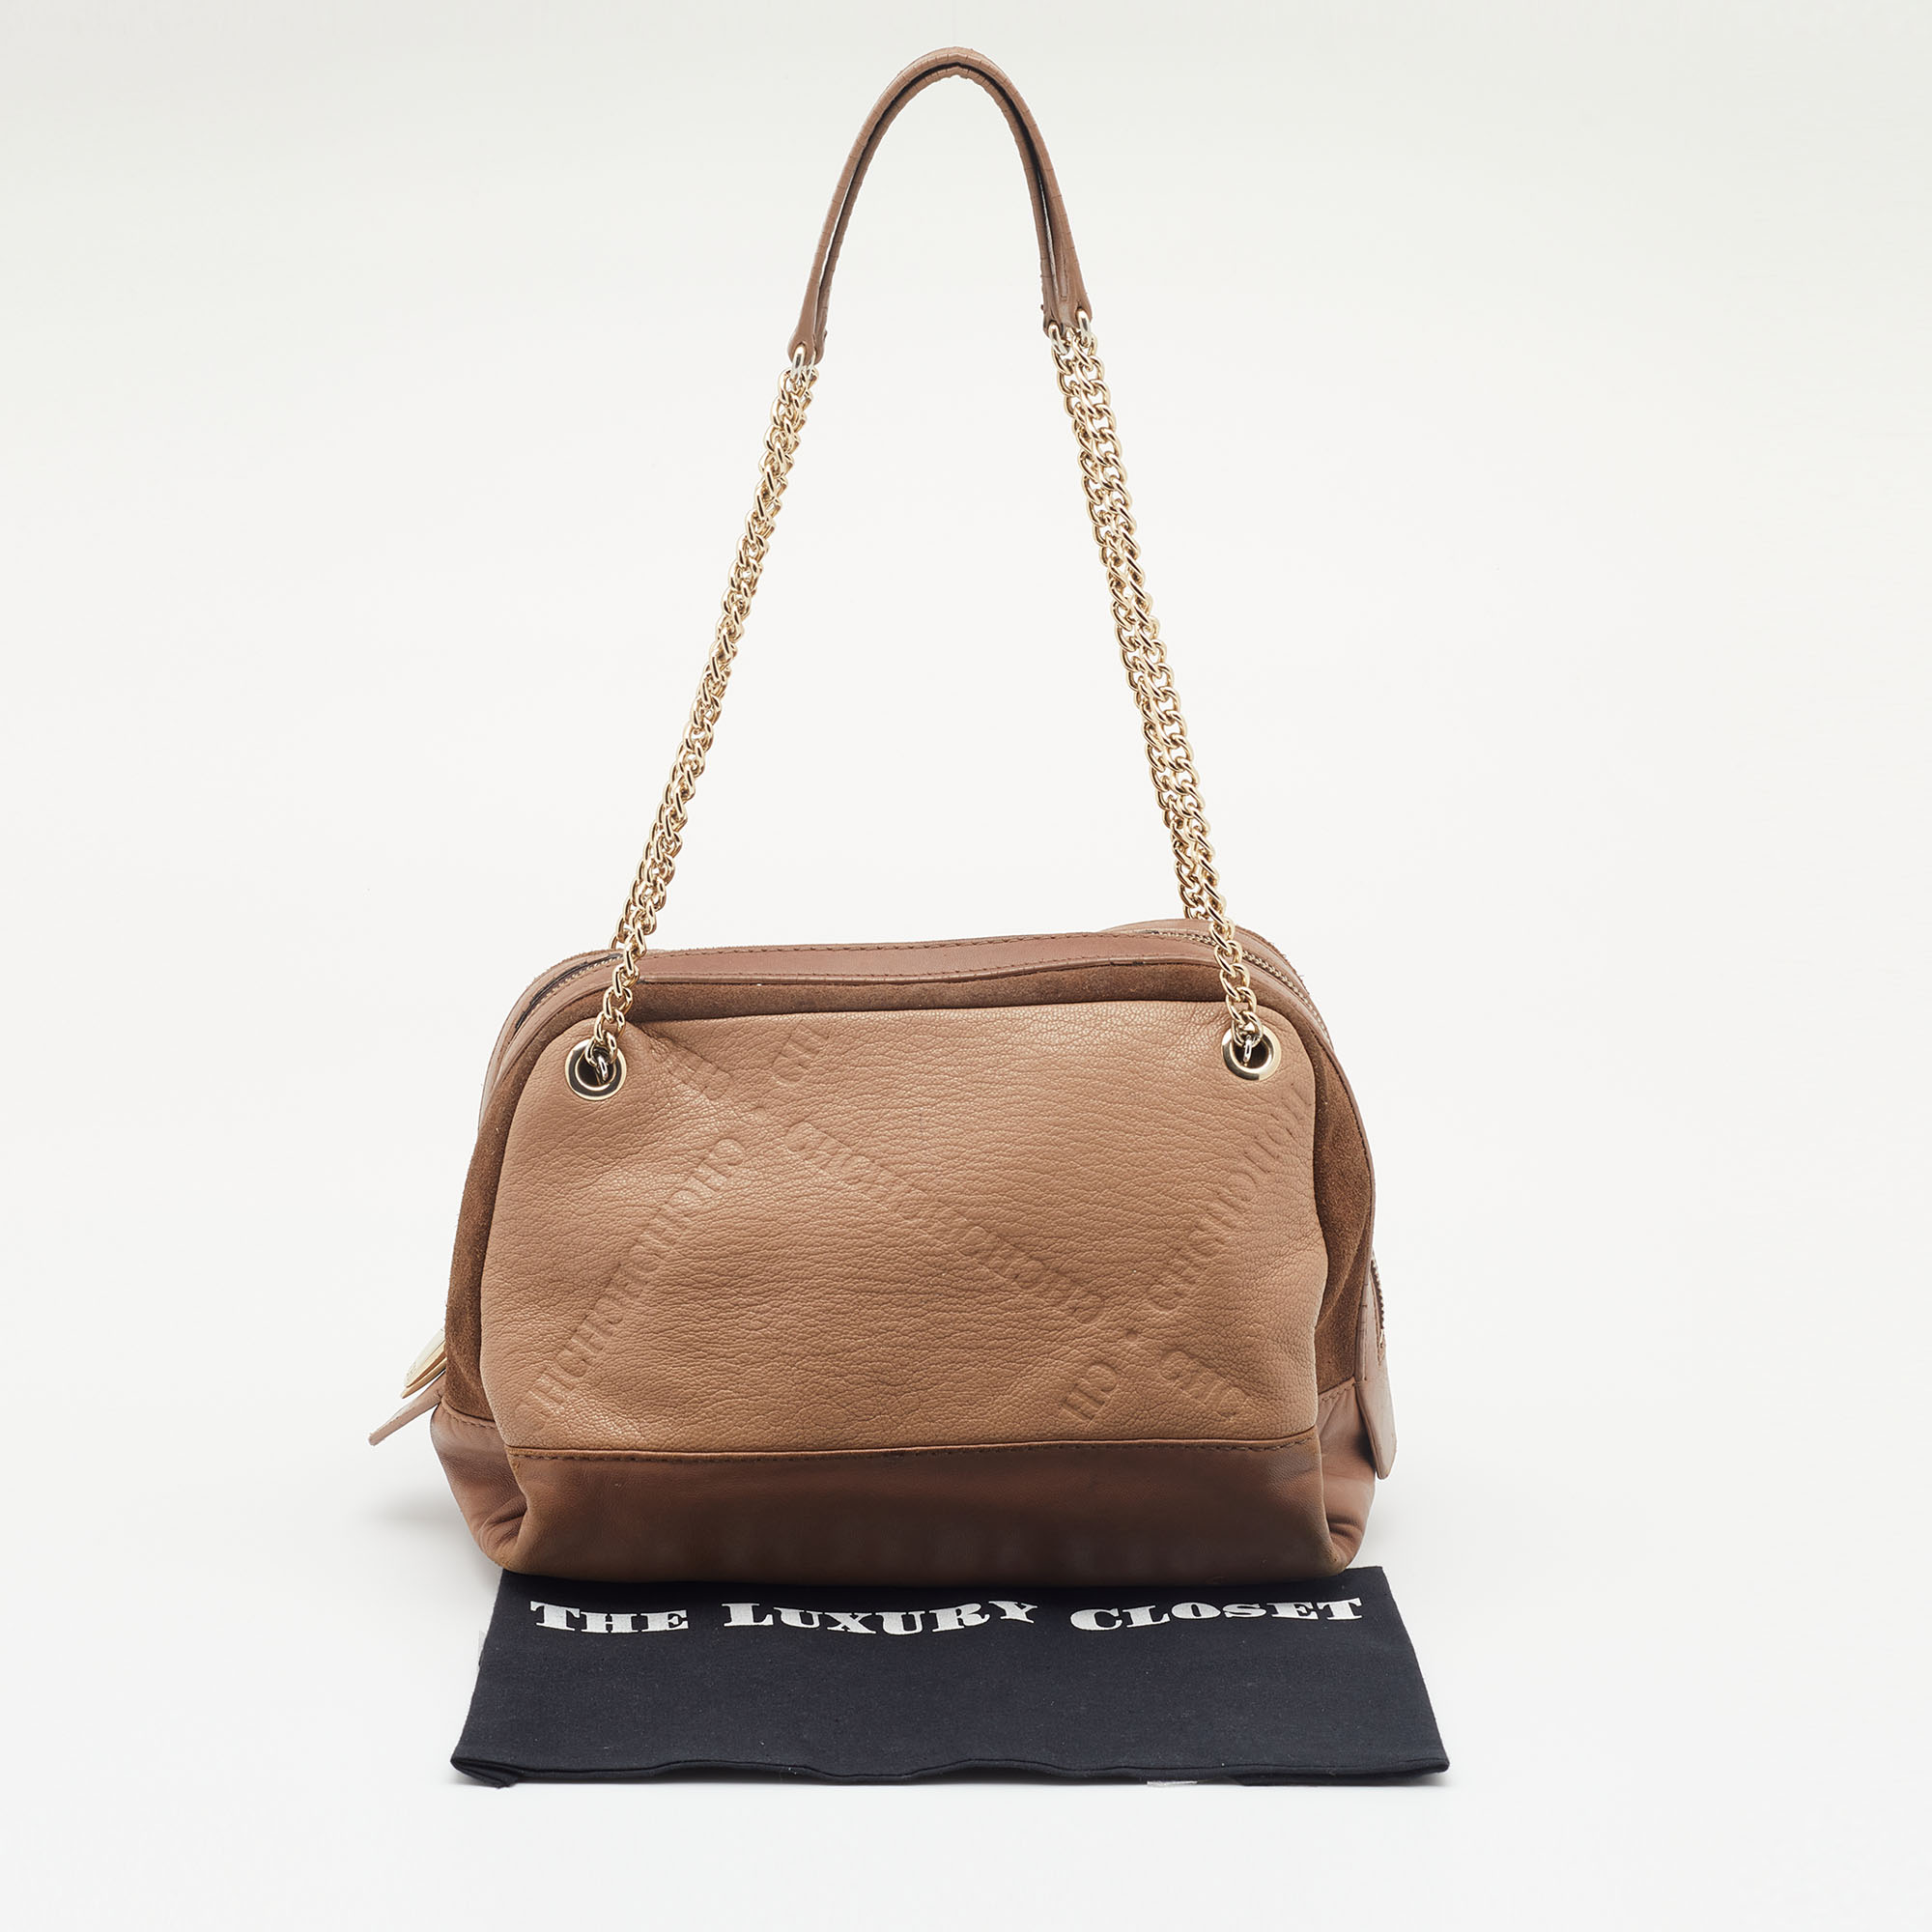 CH Carolina Herrera Brown Leather And Suede Chain Satchel